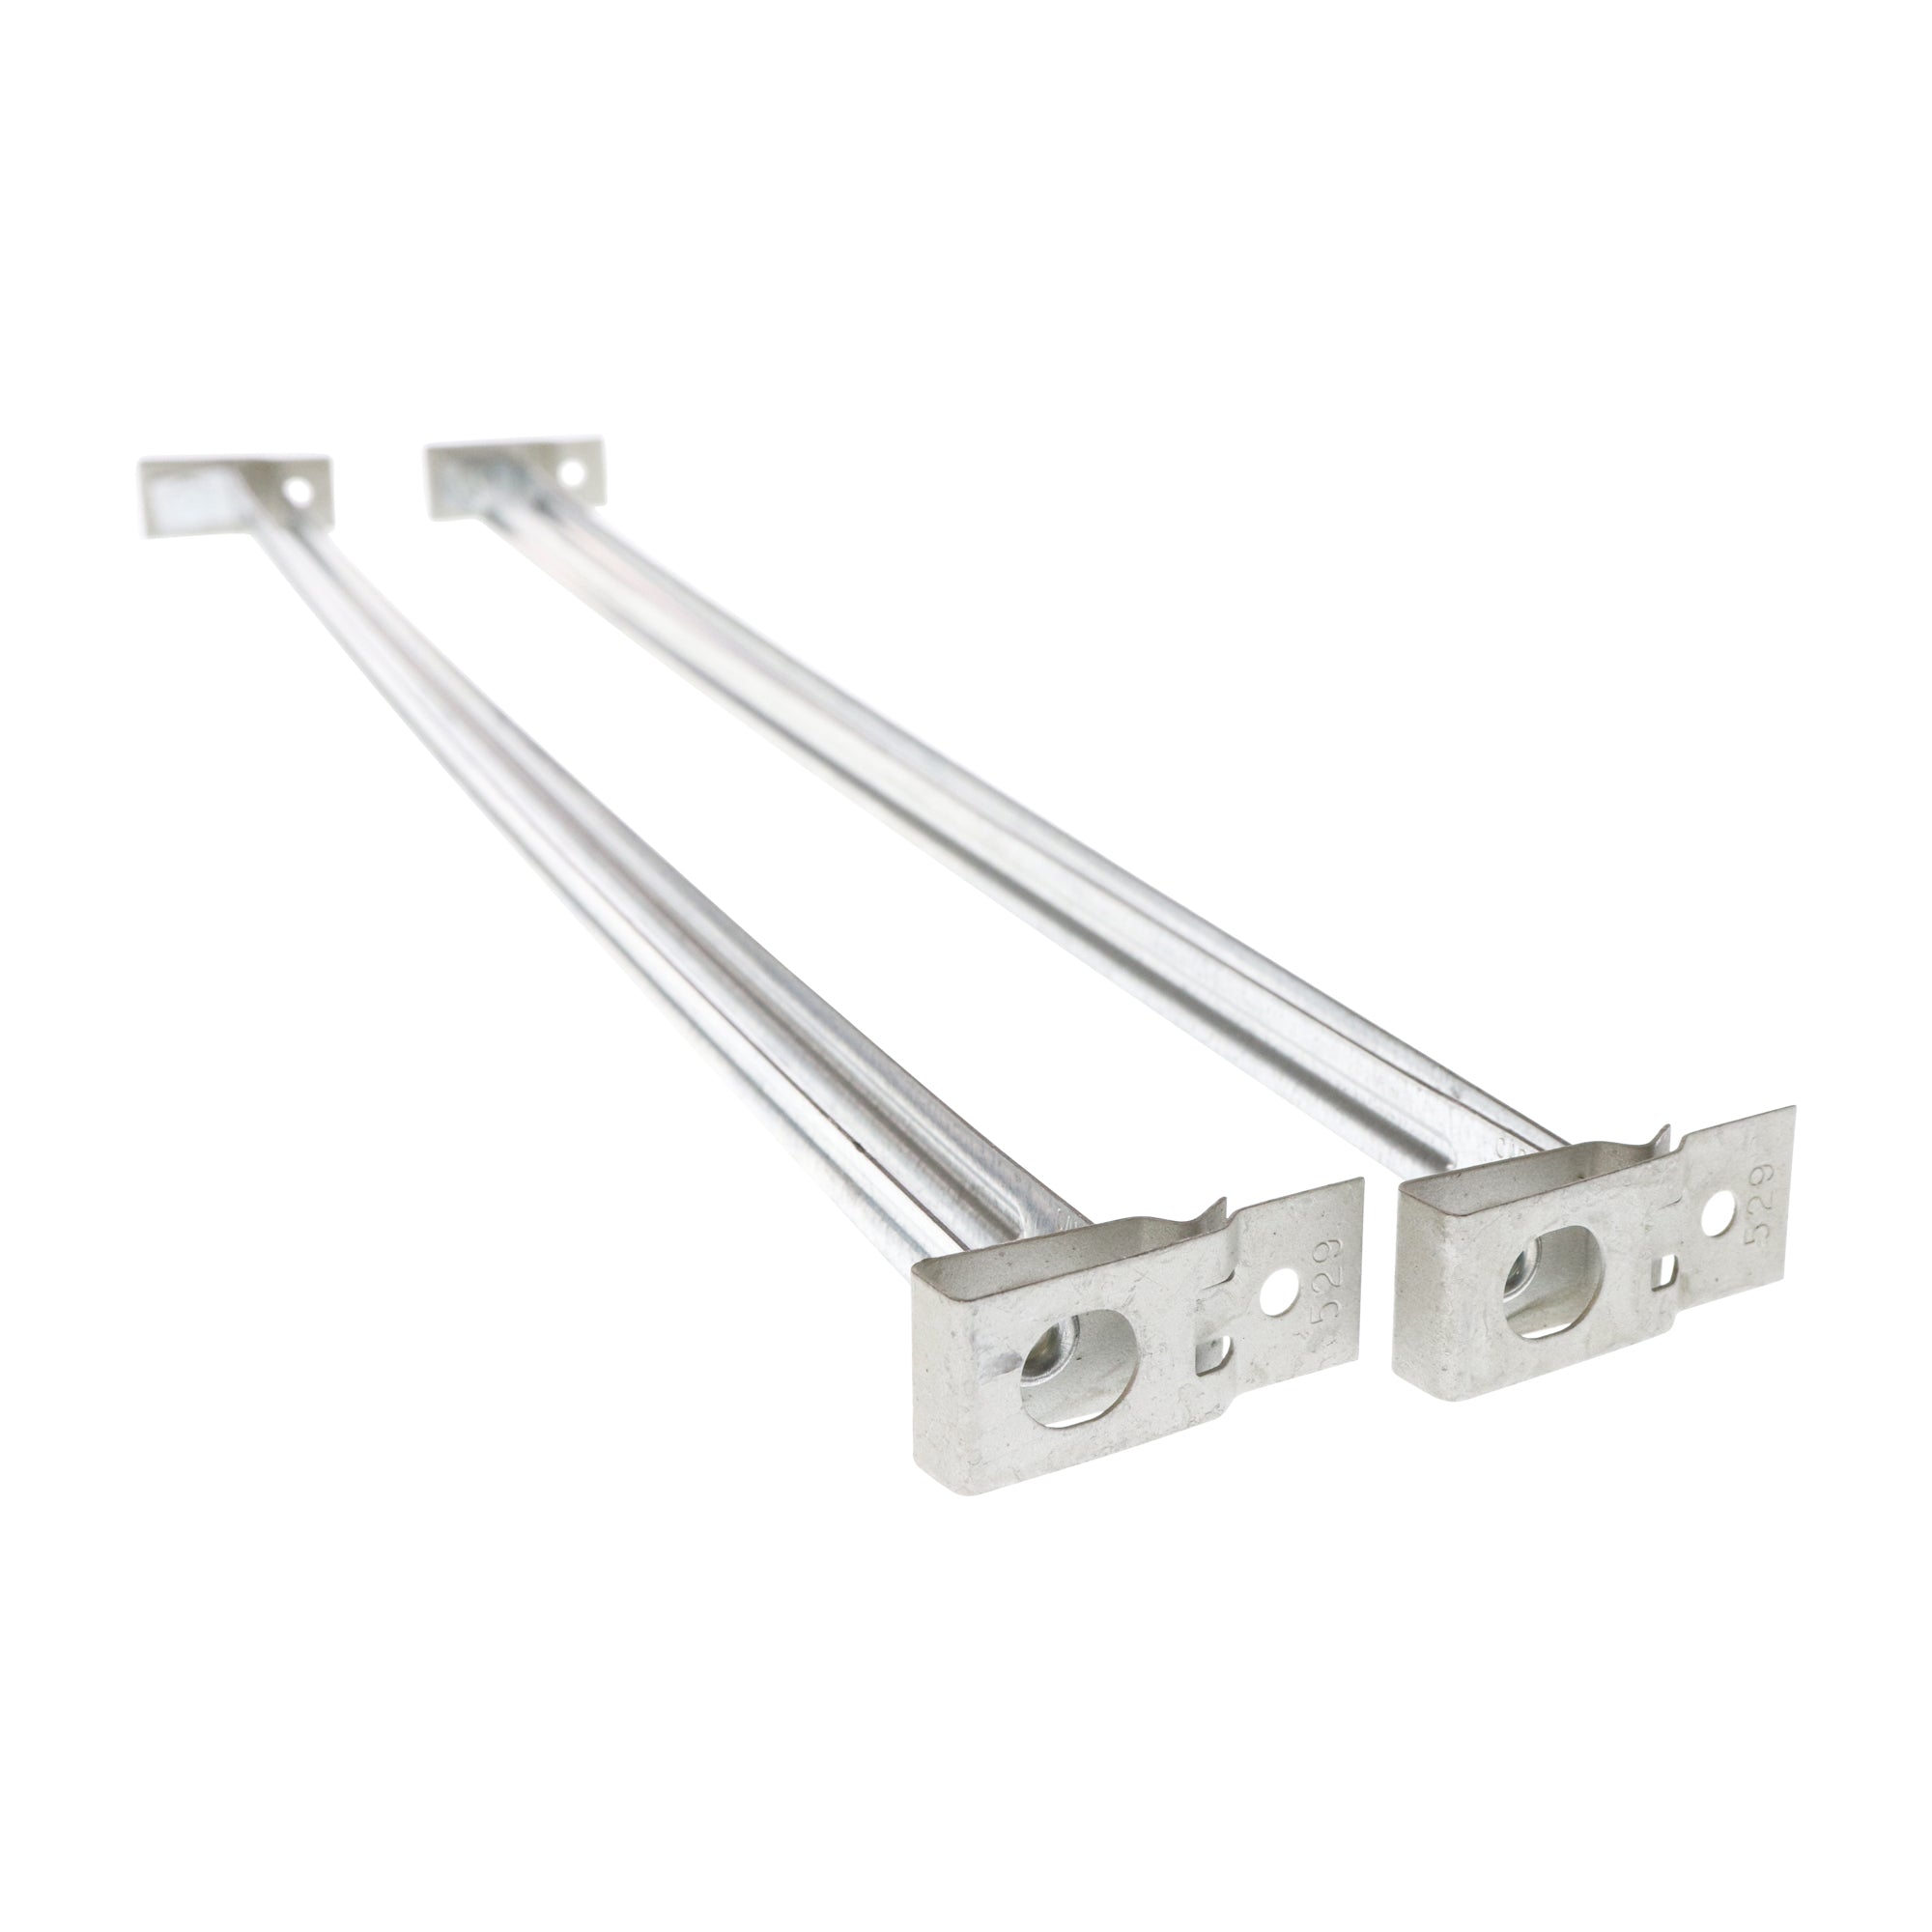 Erico Caddy Cadwal, CADDY ERICO 517B T-GRID RECESSED LIGHT FIXTURE SUSPENSION BAR, (10-PACK)